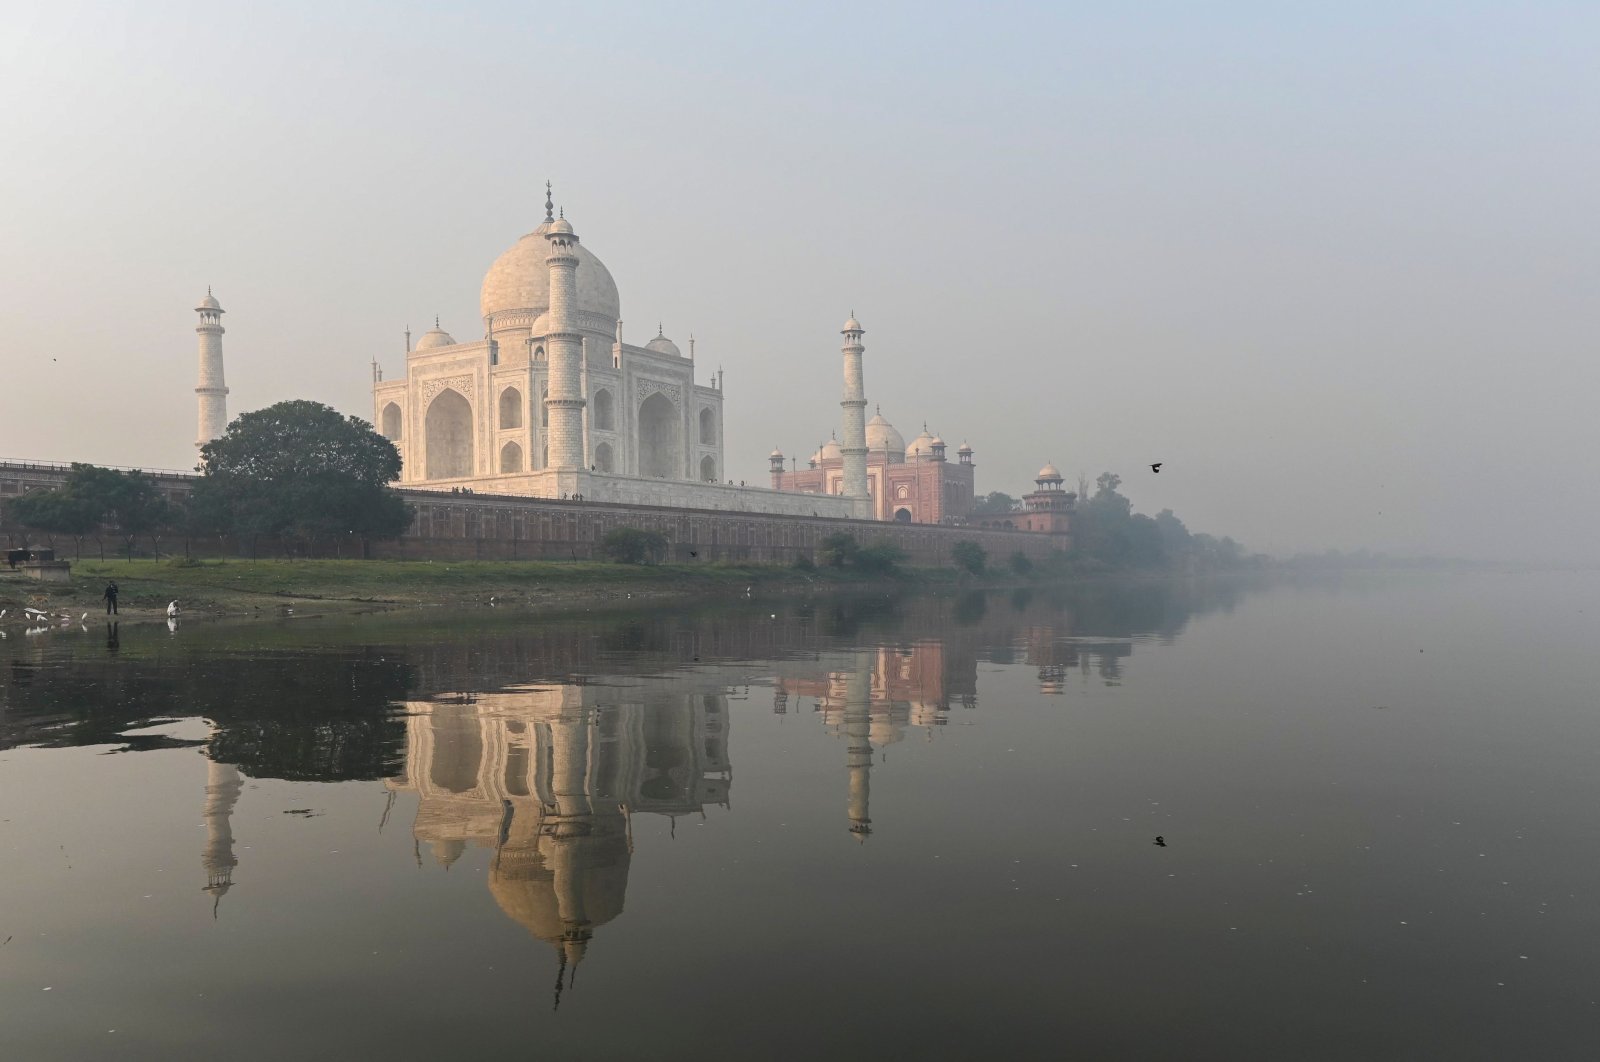 Men pray at the banks of the Yamuna River near the Taj Mahal amid smoggy conditions in Agra, India, Nov. 16, 2021. (AFP Photo)